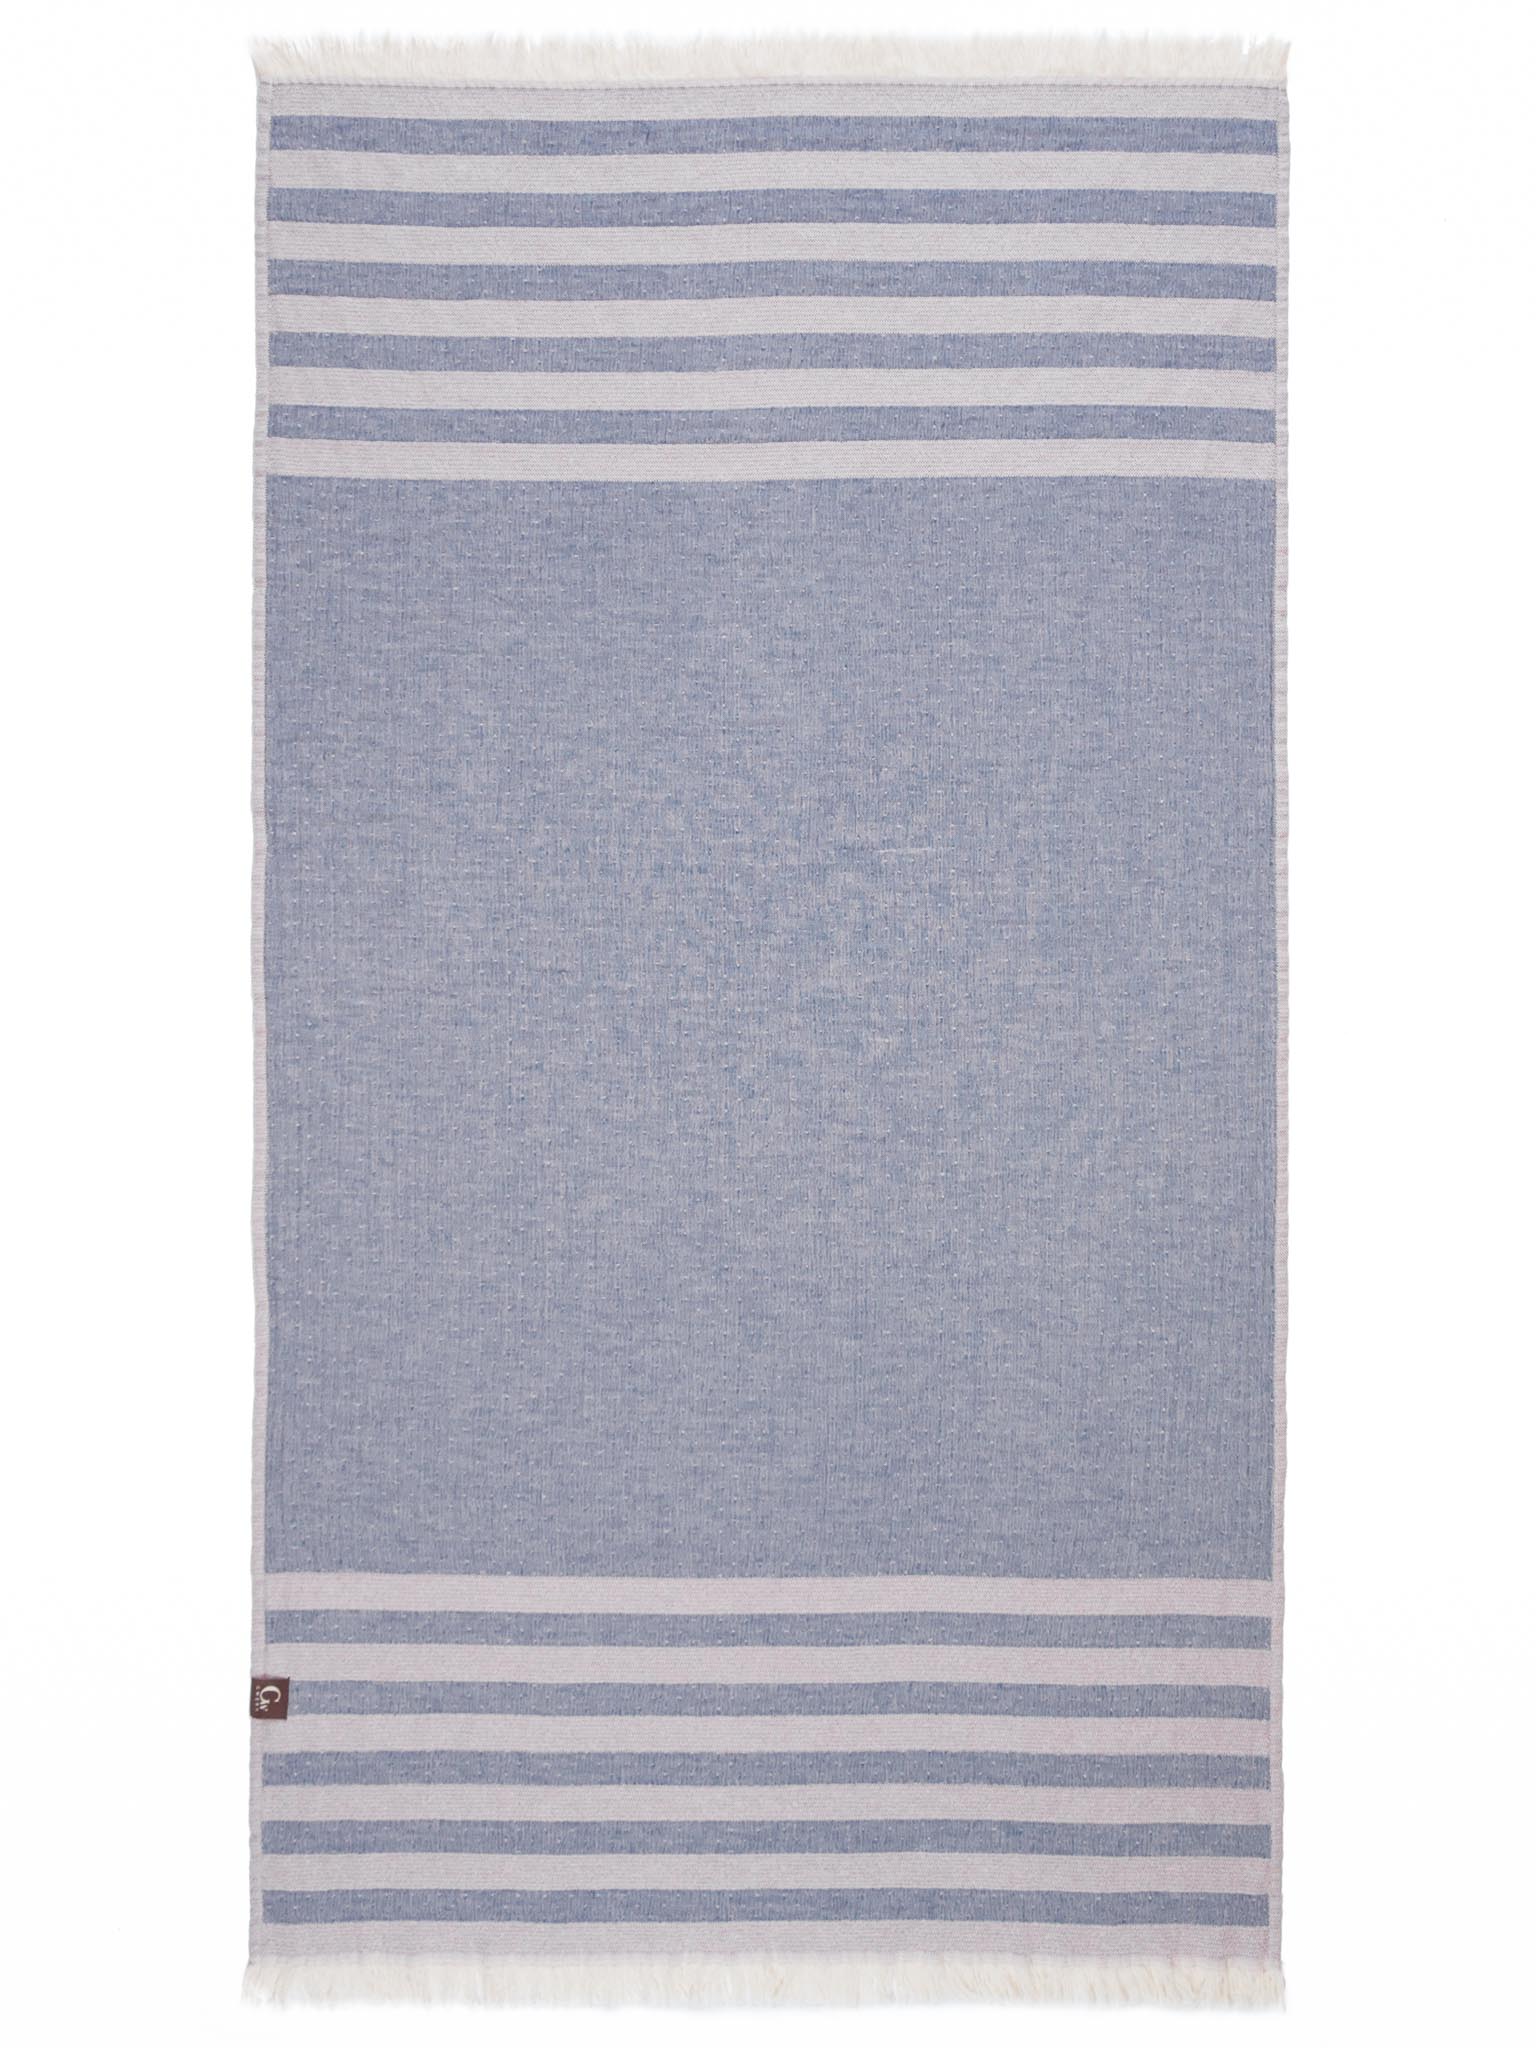 Red and blue double sided striped beach towel open up showing blue side